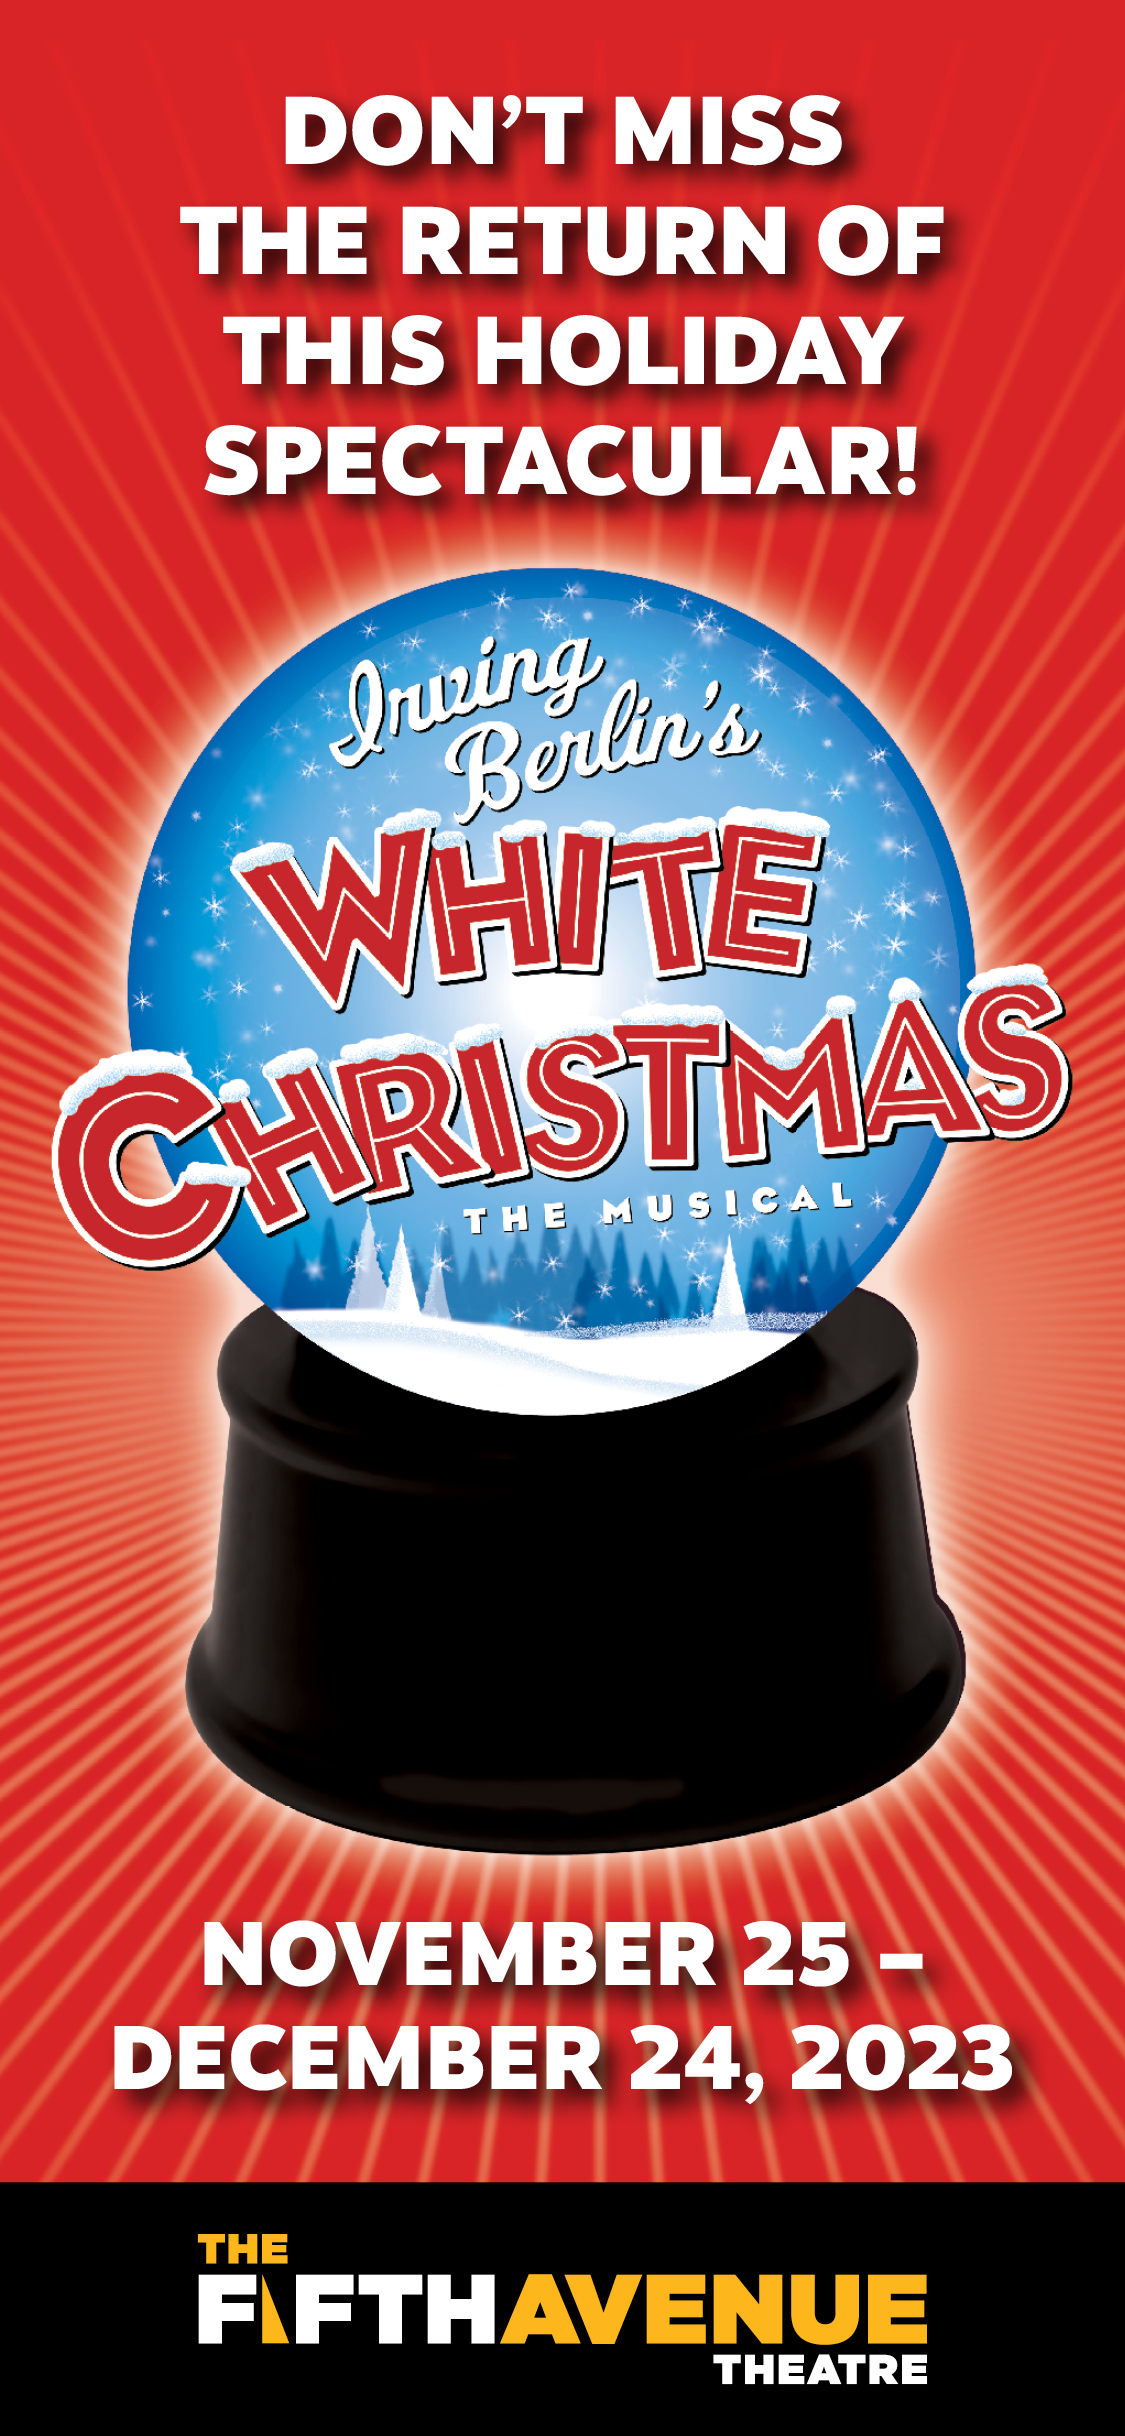 This holiday classic is coming to Seattle's Fifth Avenue Theatre